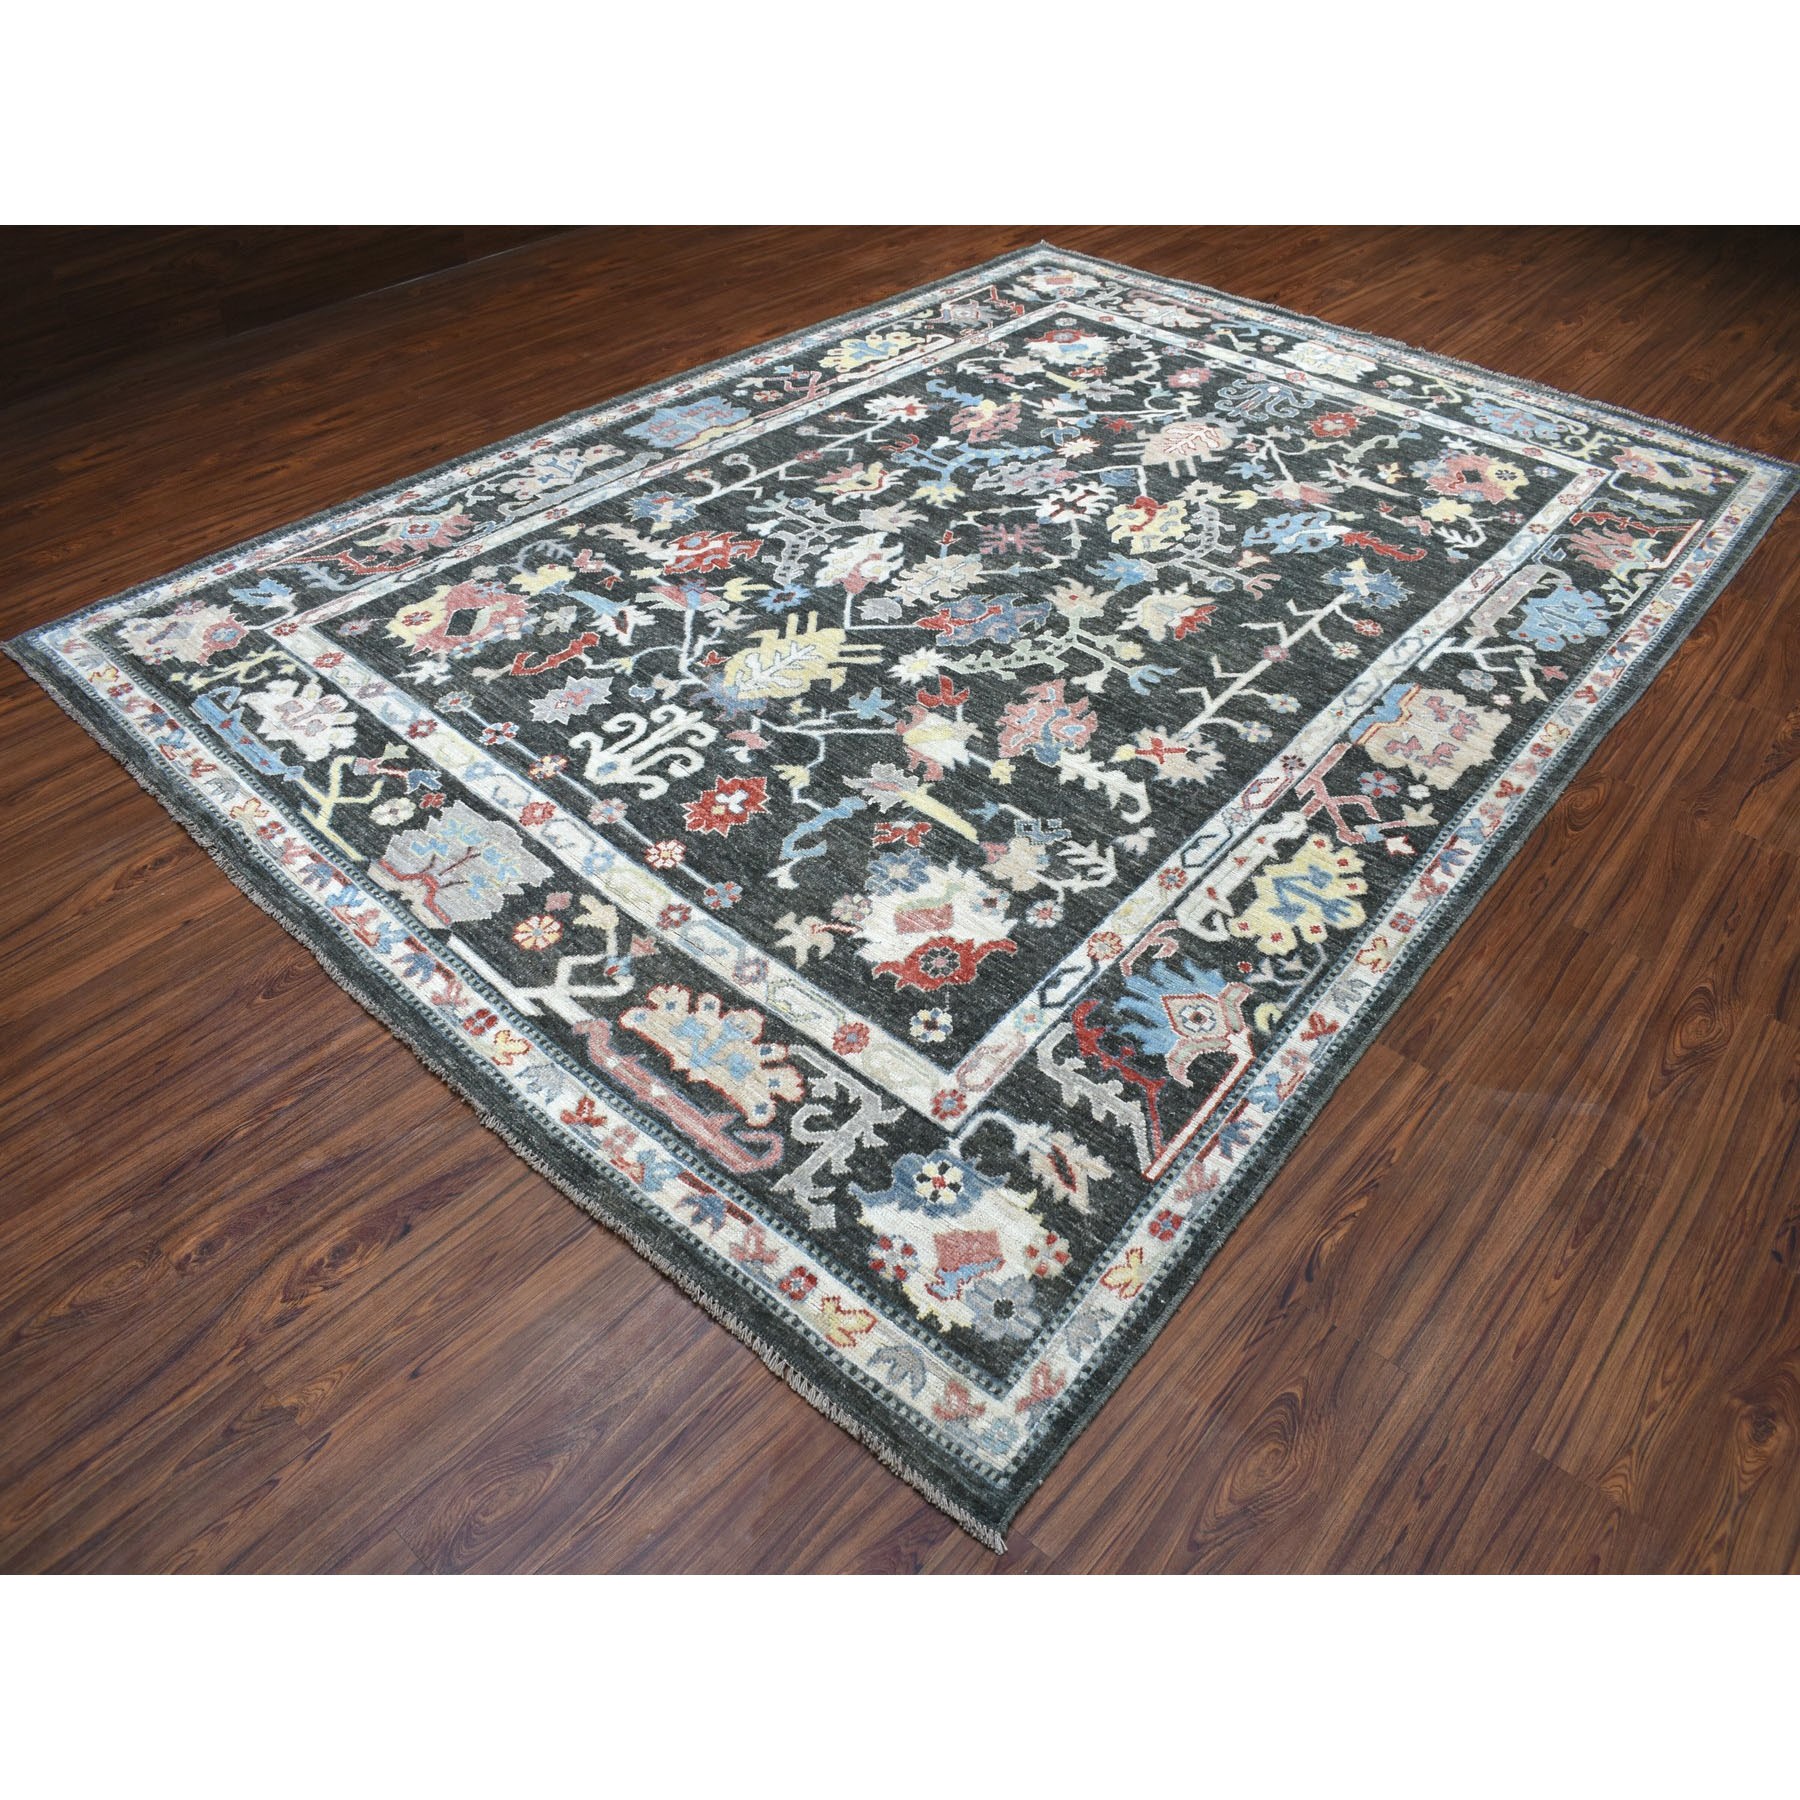 8-9 x12- Charcoal Black Angora Oushak With Soft Velvety Wool Hand Knotted Oriental Rug 